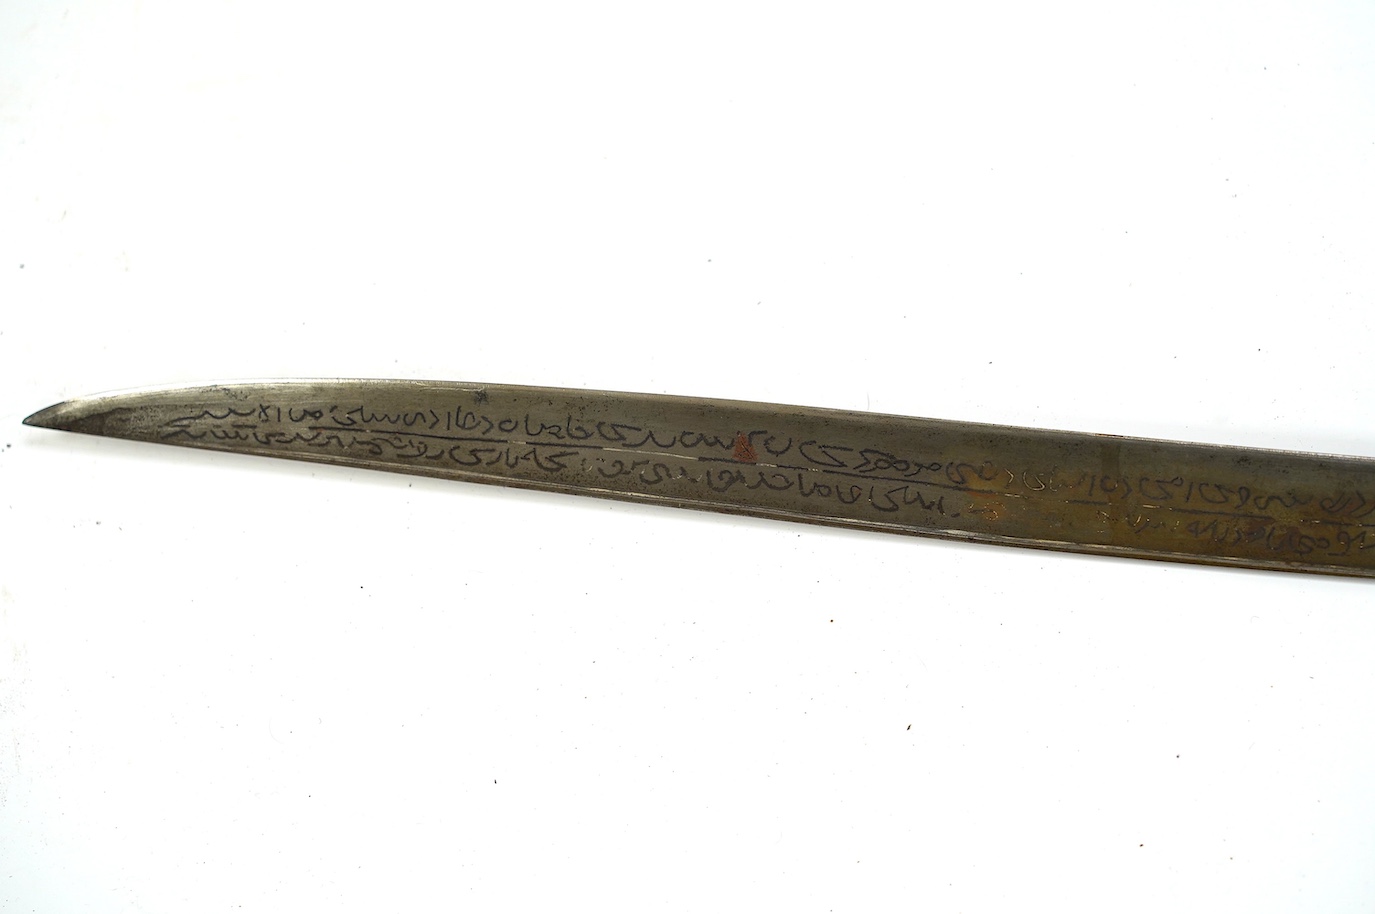 A 19th century Turkish Yataghan, blade inlaid with extensive inscriptions, embossed hilt, two piece horn grips, blade 55.5cm. Condition - good